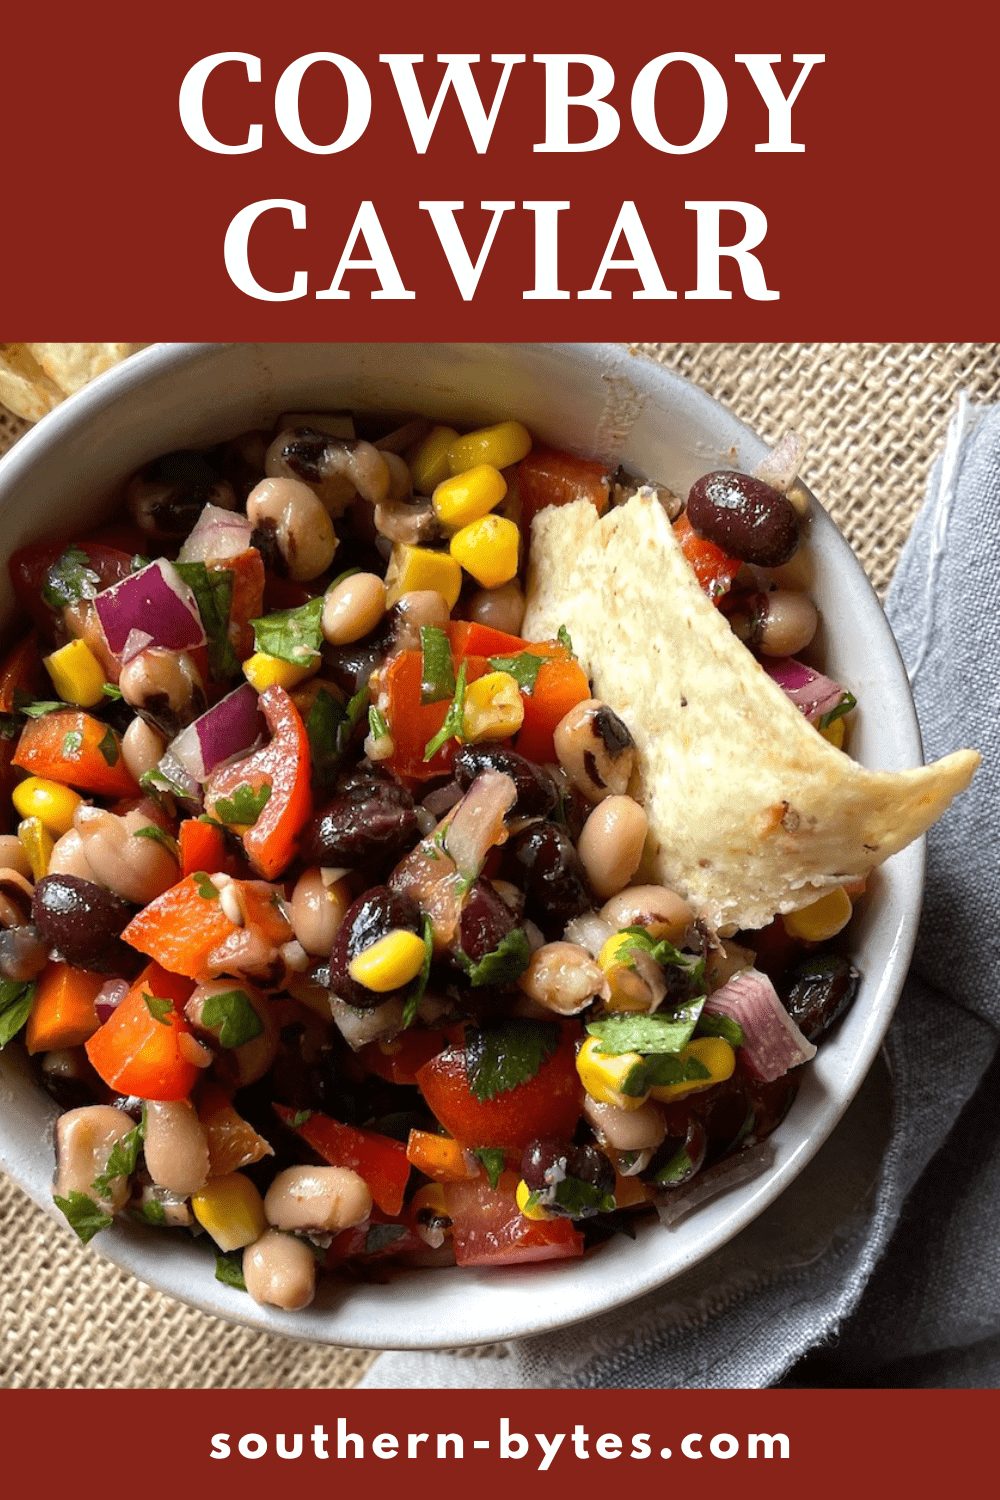 A pin image of a small bowl of cowboy caviar with black-eyed peas, black beans, corn, tomatoes, red onions, and cilantro with a vinegar based dressing and a side of tortilla chips.